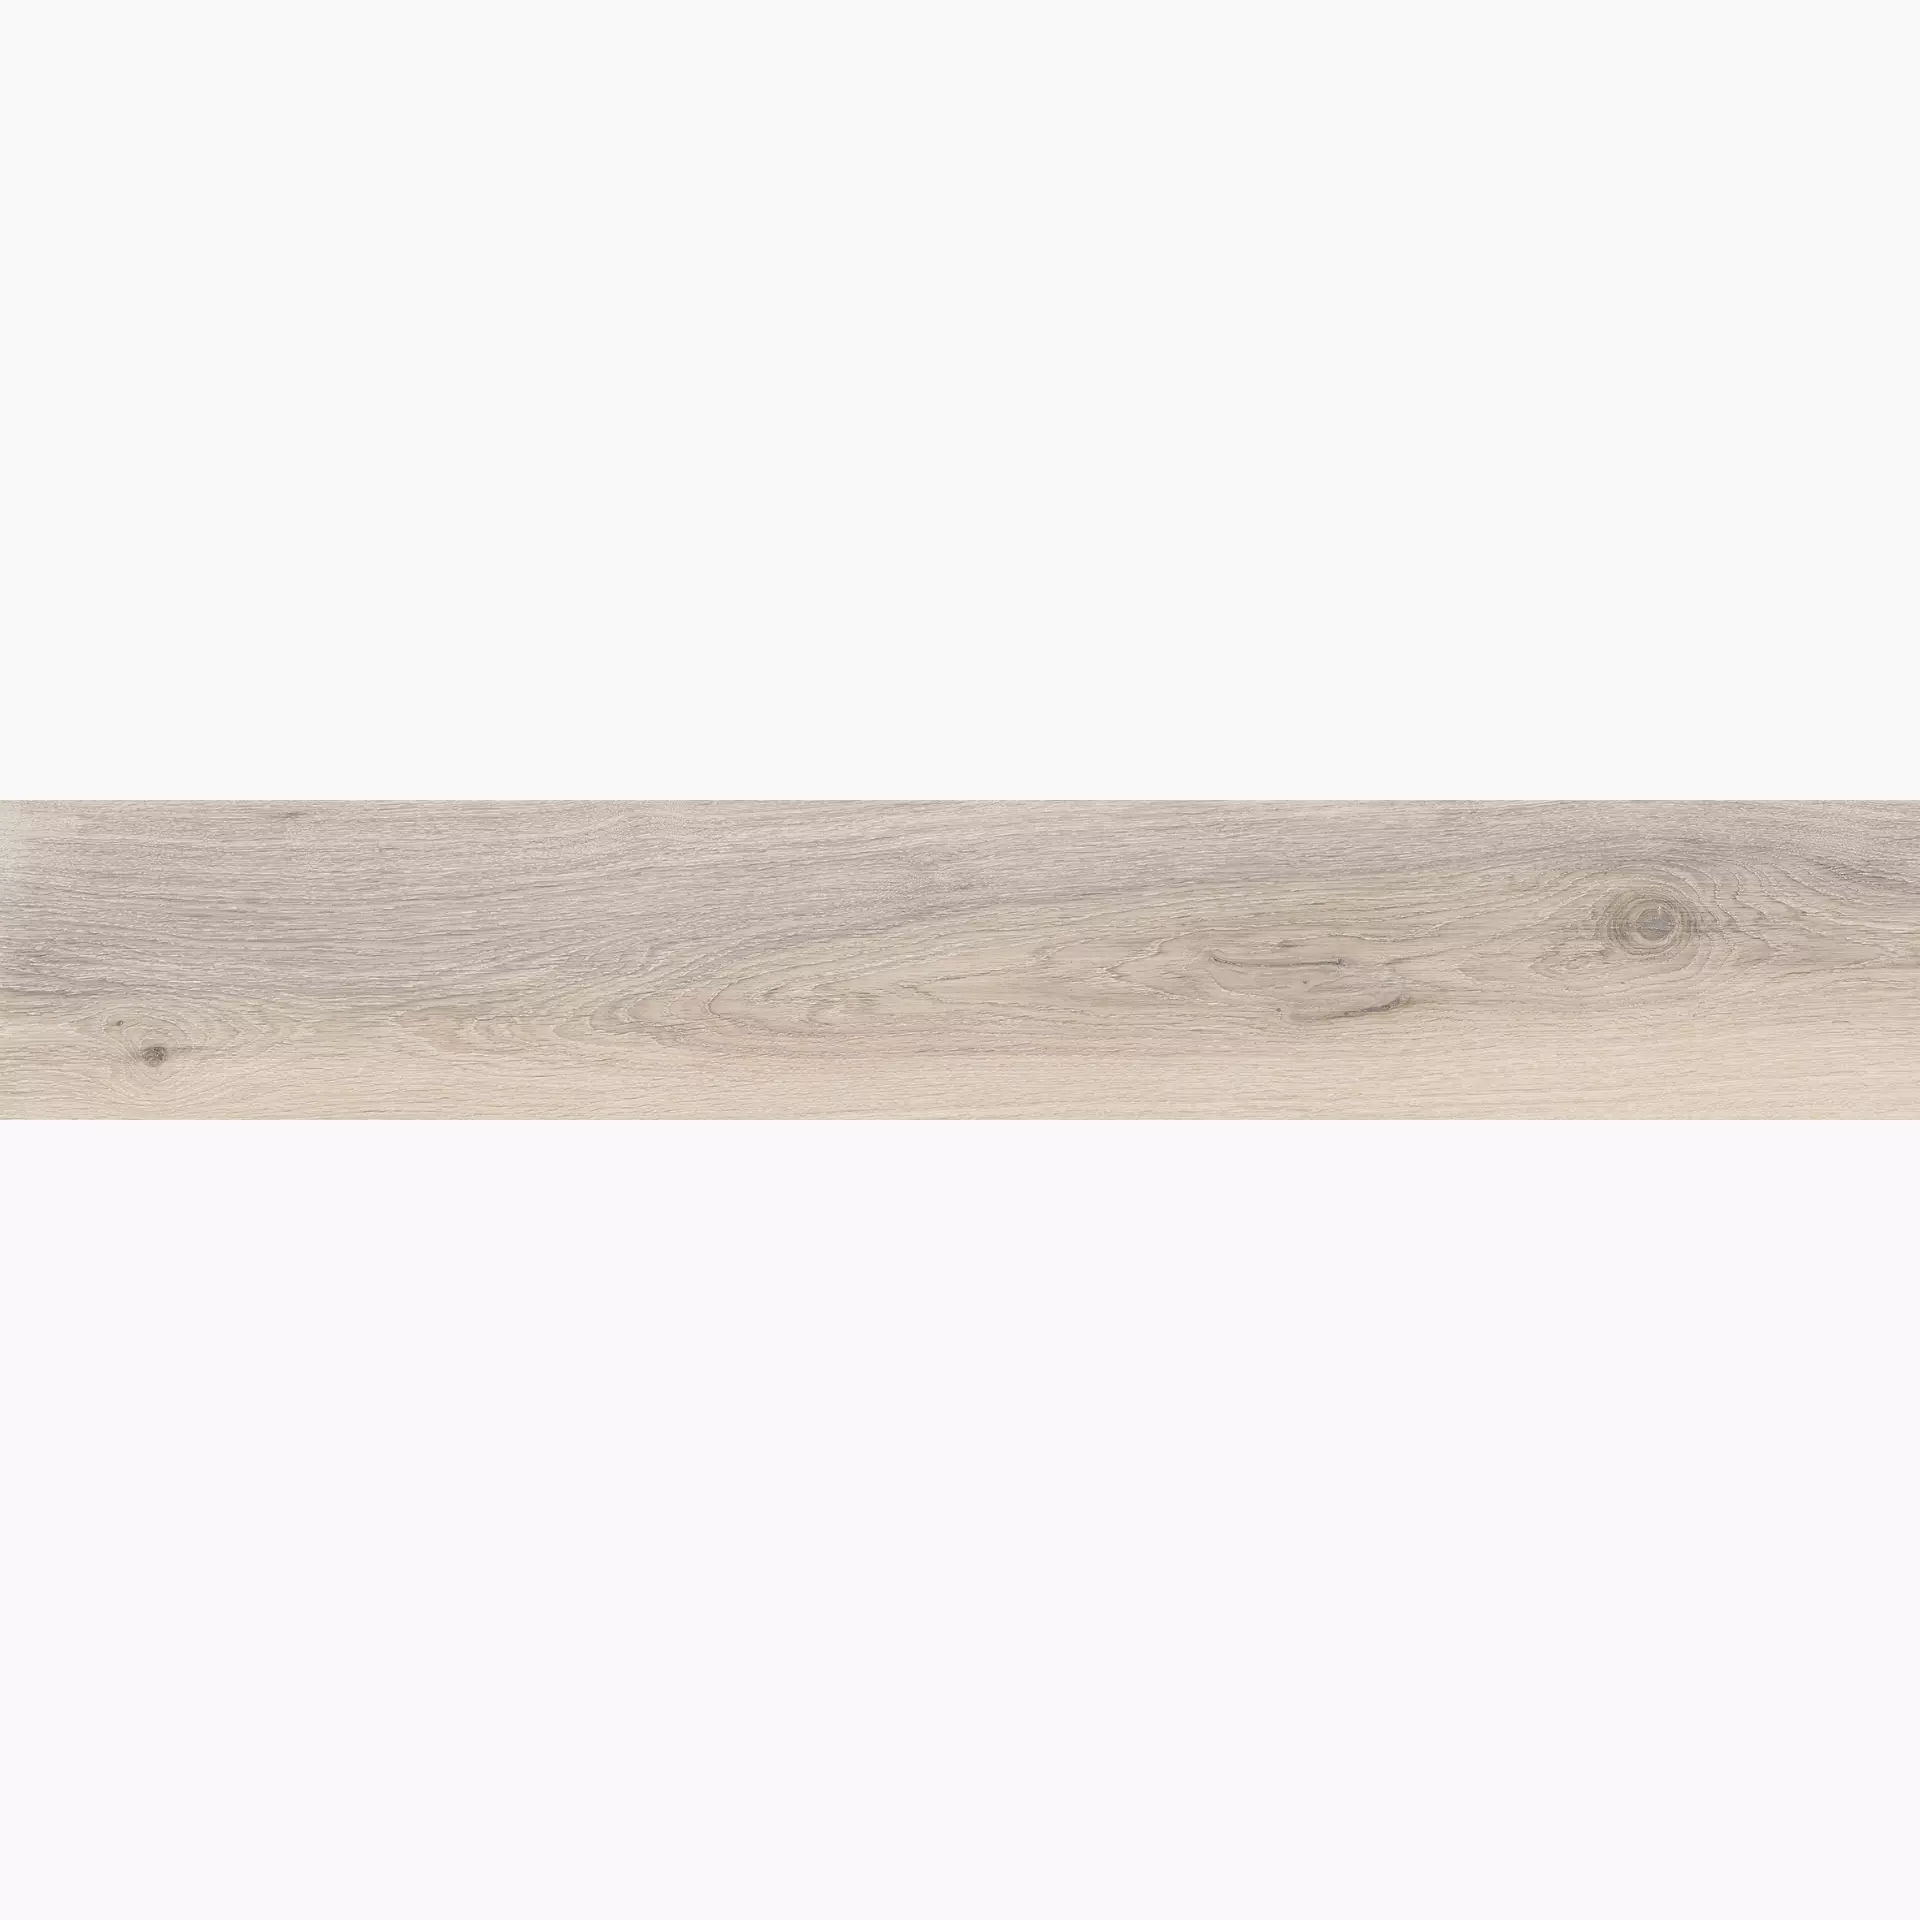 ABK Eco-Chic Almond Naturale PF60004938 20x120cm rectified 8,5mm